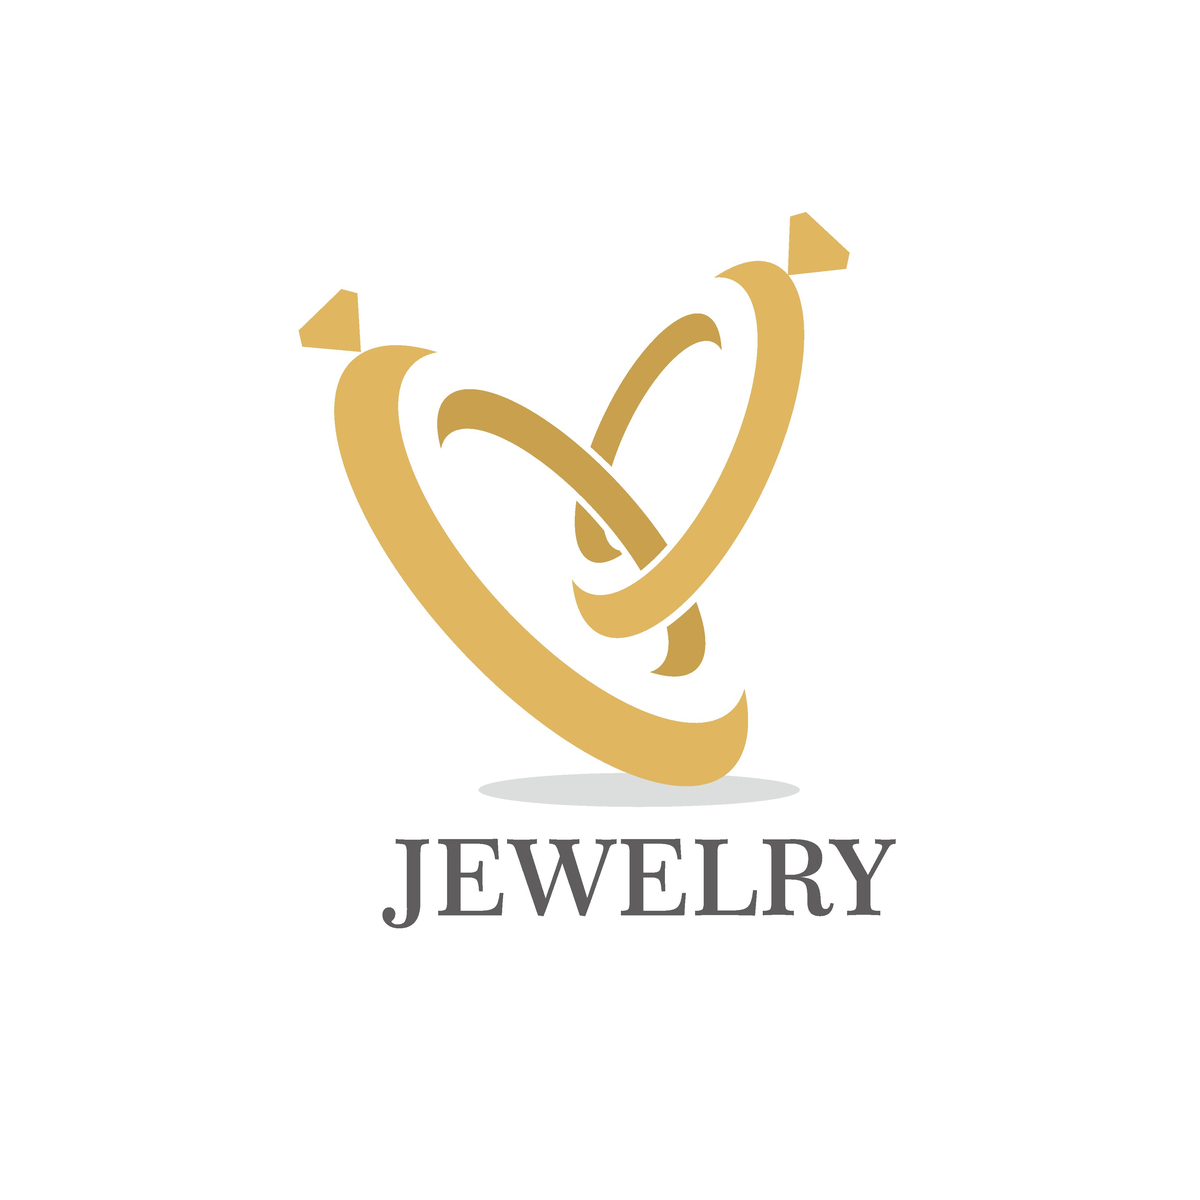 Best Jewelry Logo Design Ideas for Your Need